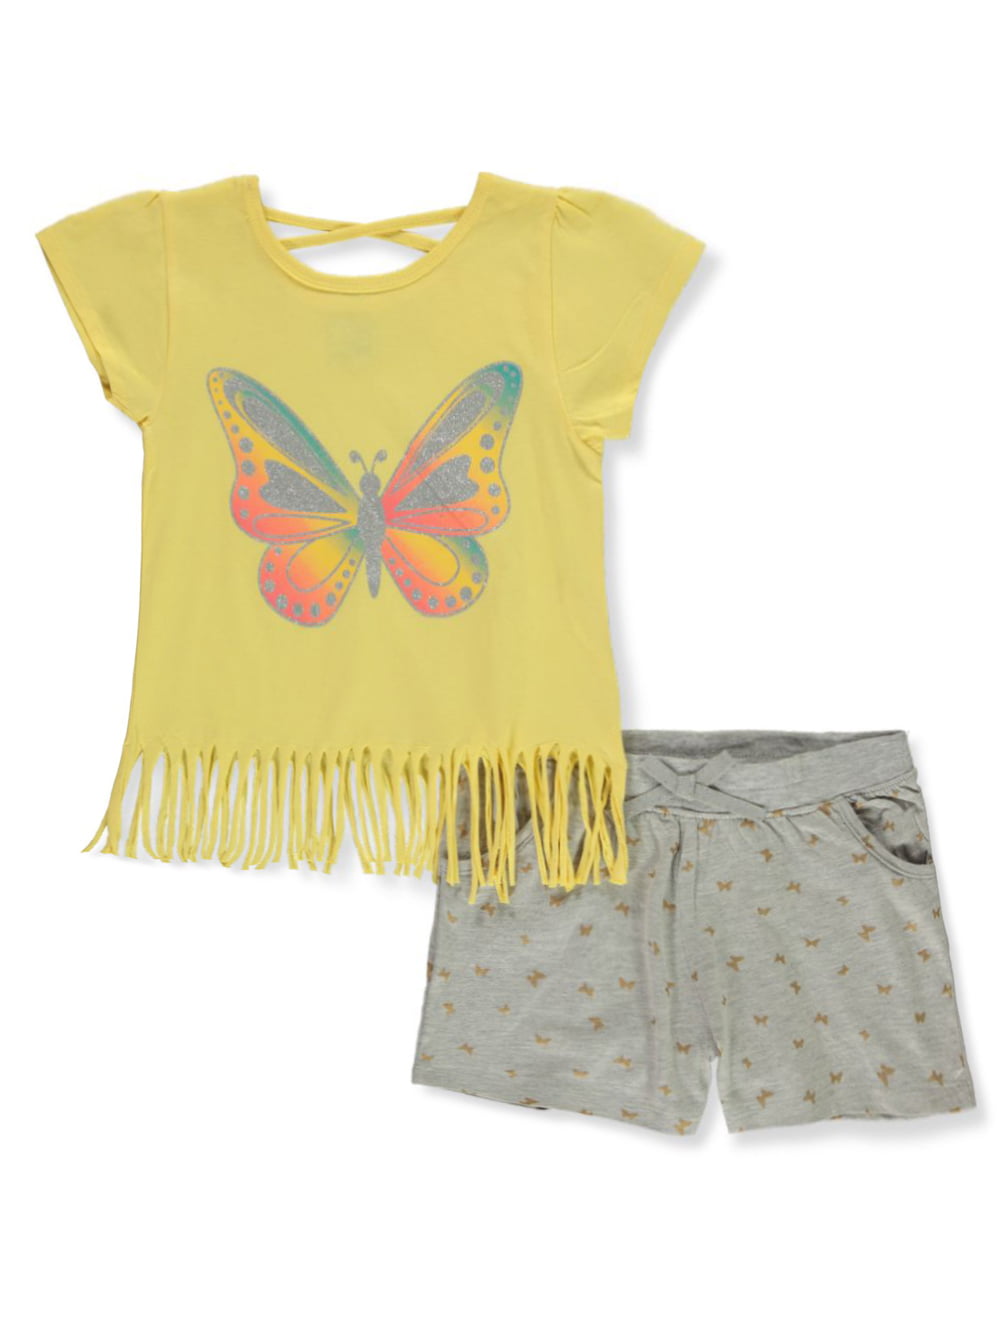 NWT 2pc *BABY essentials* Butterfly Top & Shorts Outfit Set 6-9 mo 